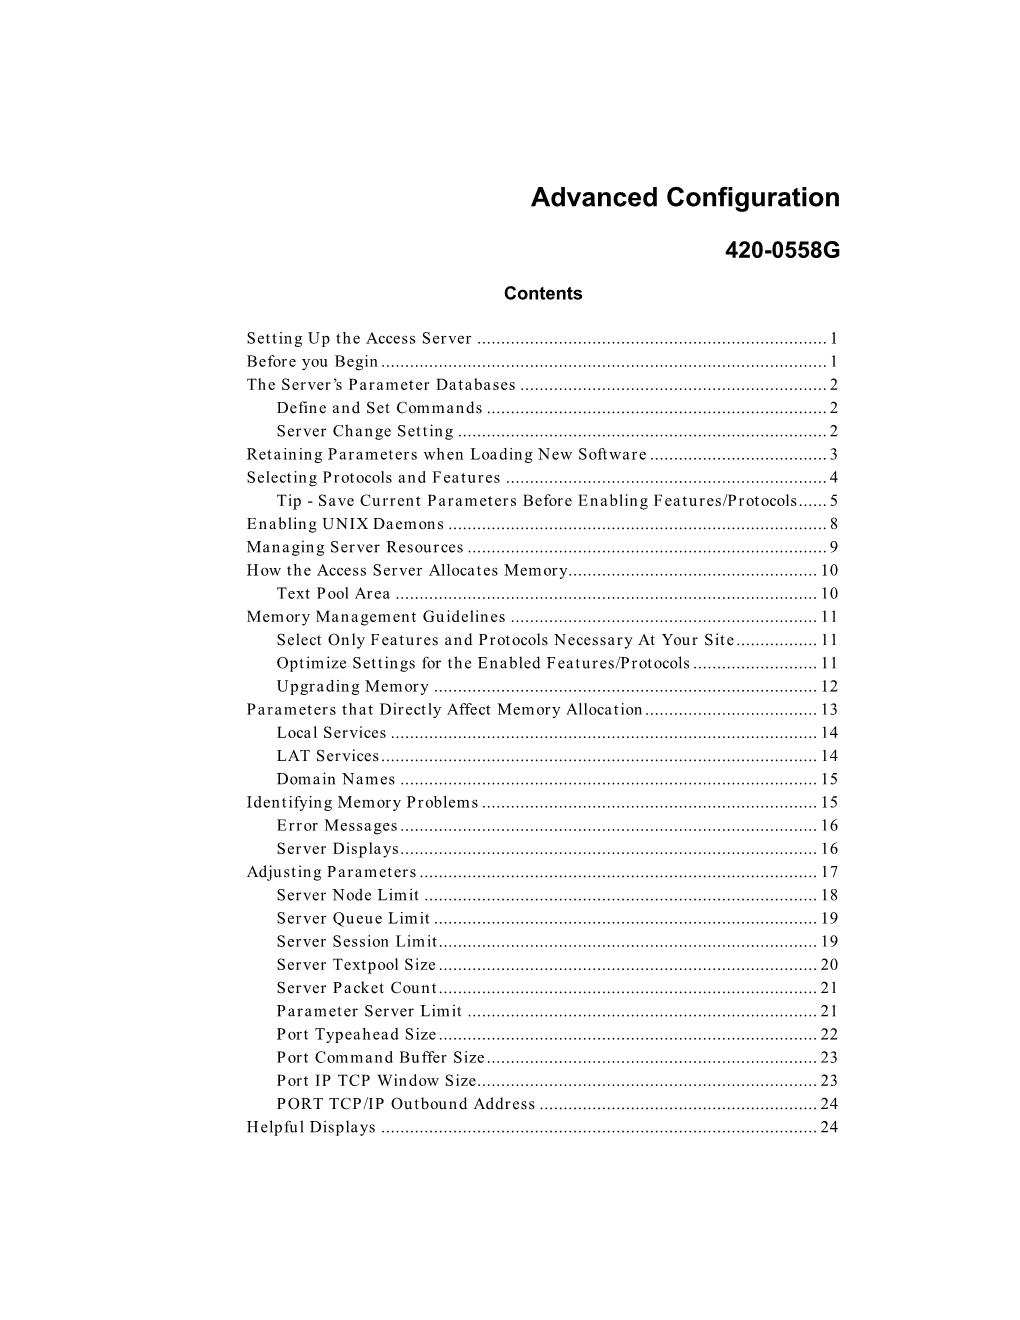 Advanced Configuration Guide for More Information About Scripts